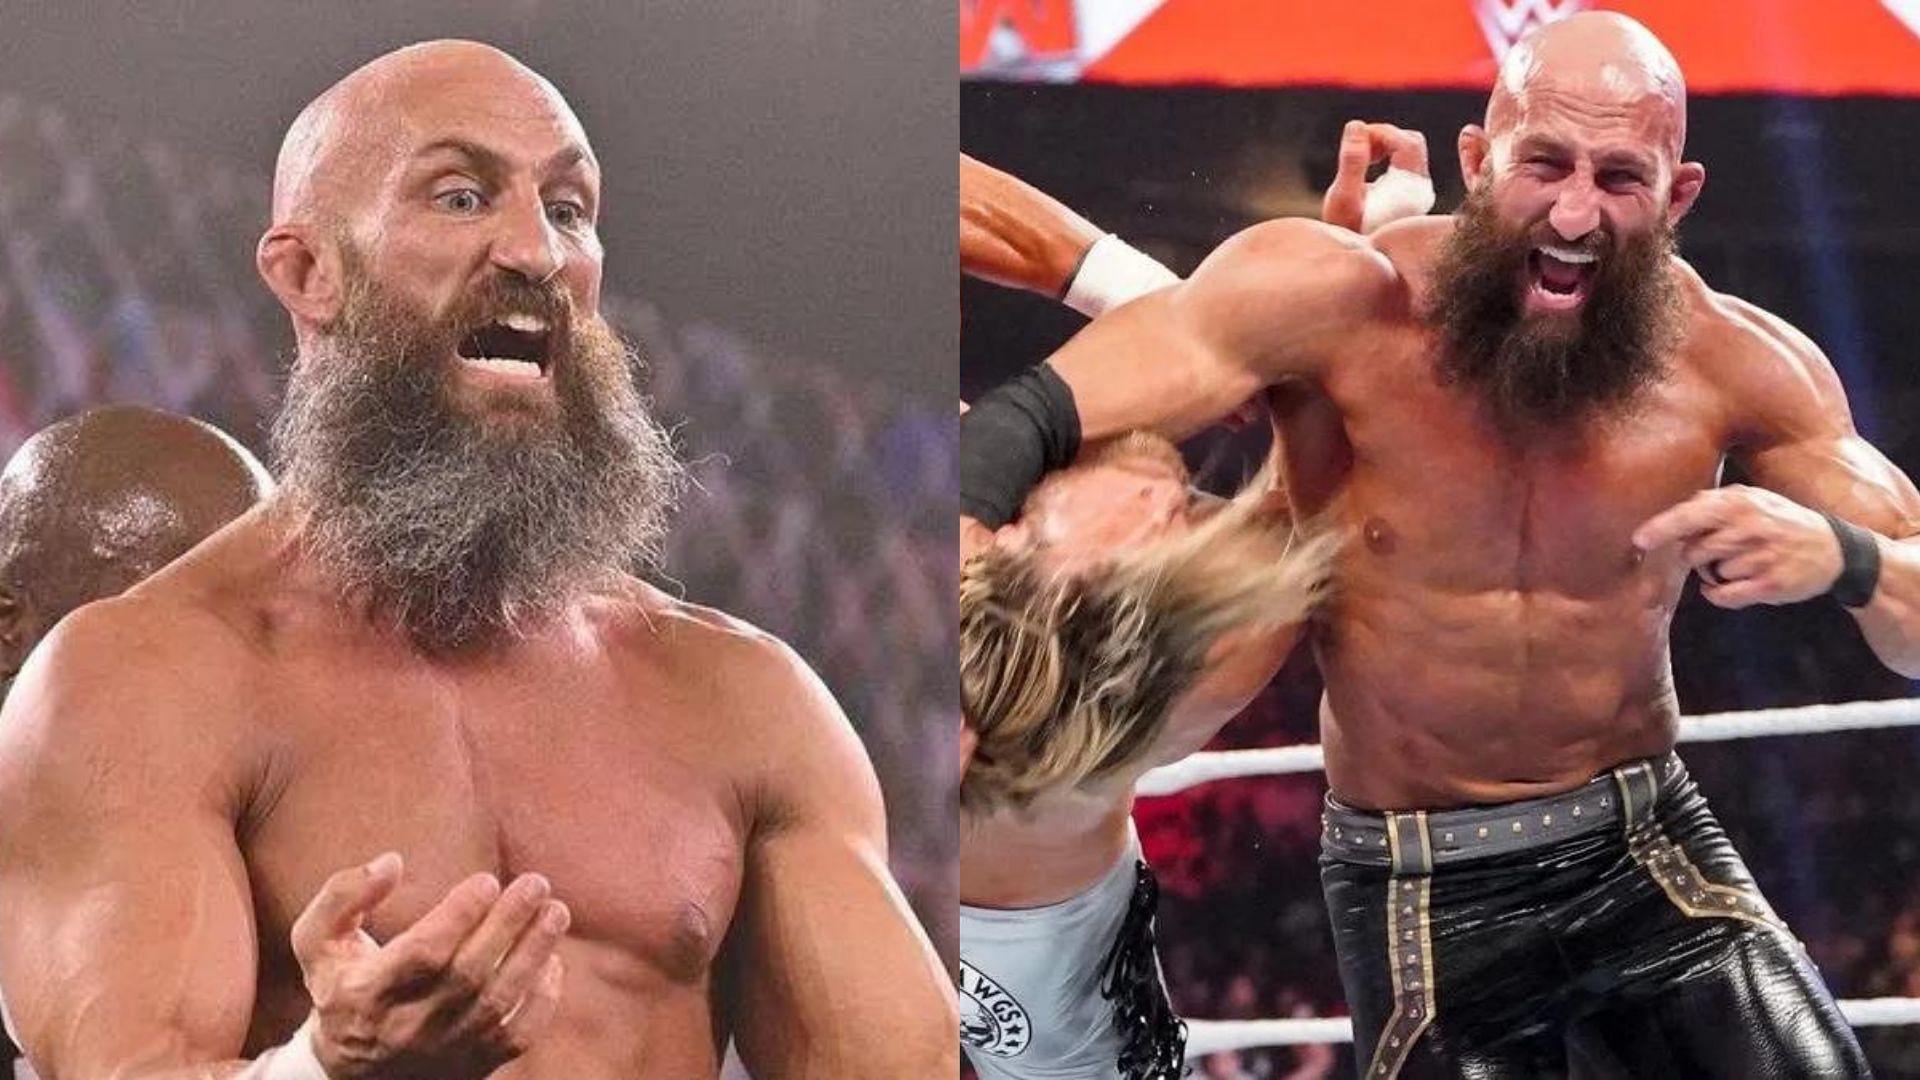 Tommaso Ciampa could possibly reunite DIY on the main roster